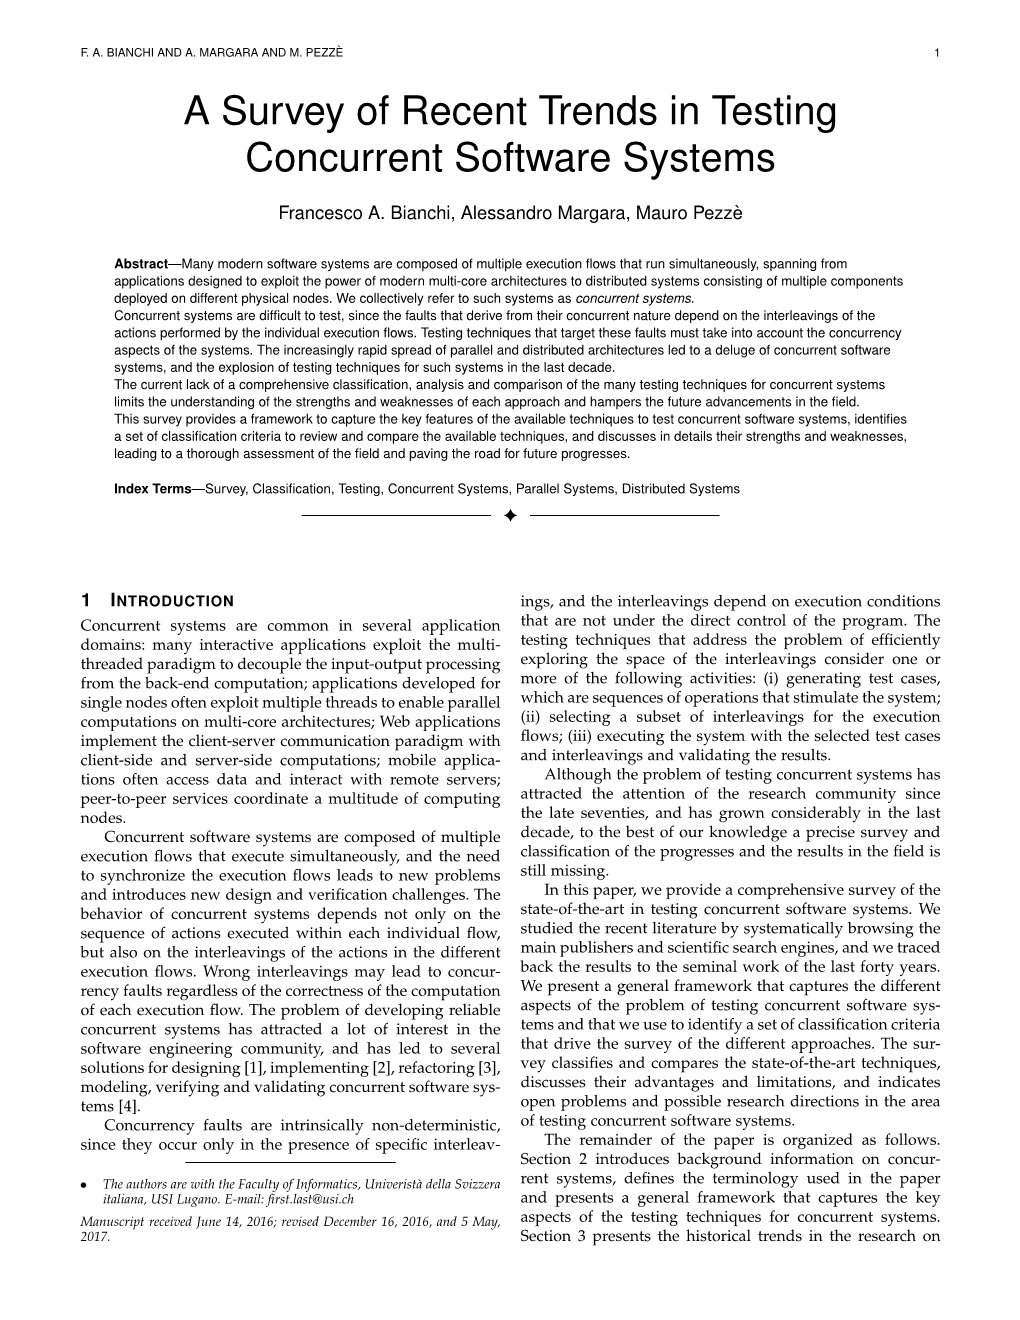 A Survey of Recent Trends in Testing Concurrent Software Systems